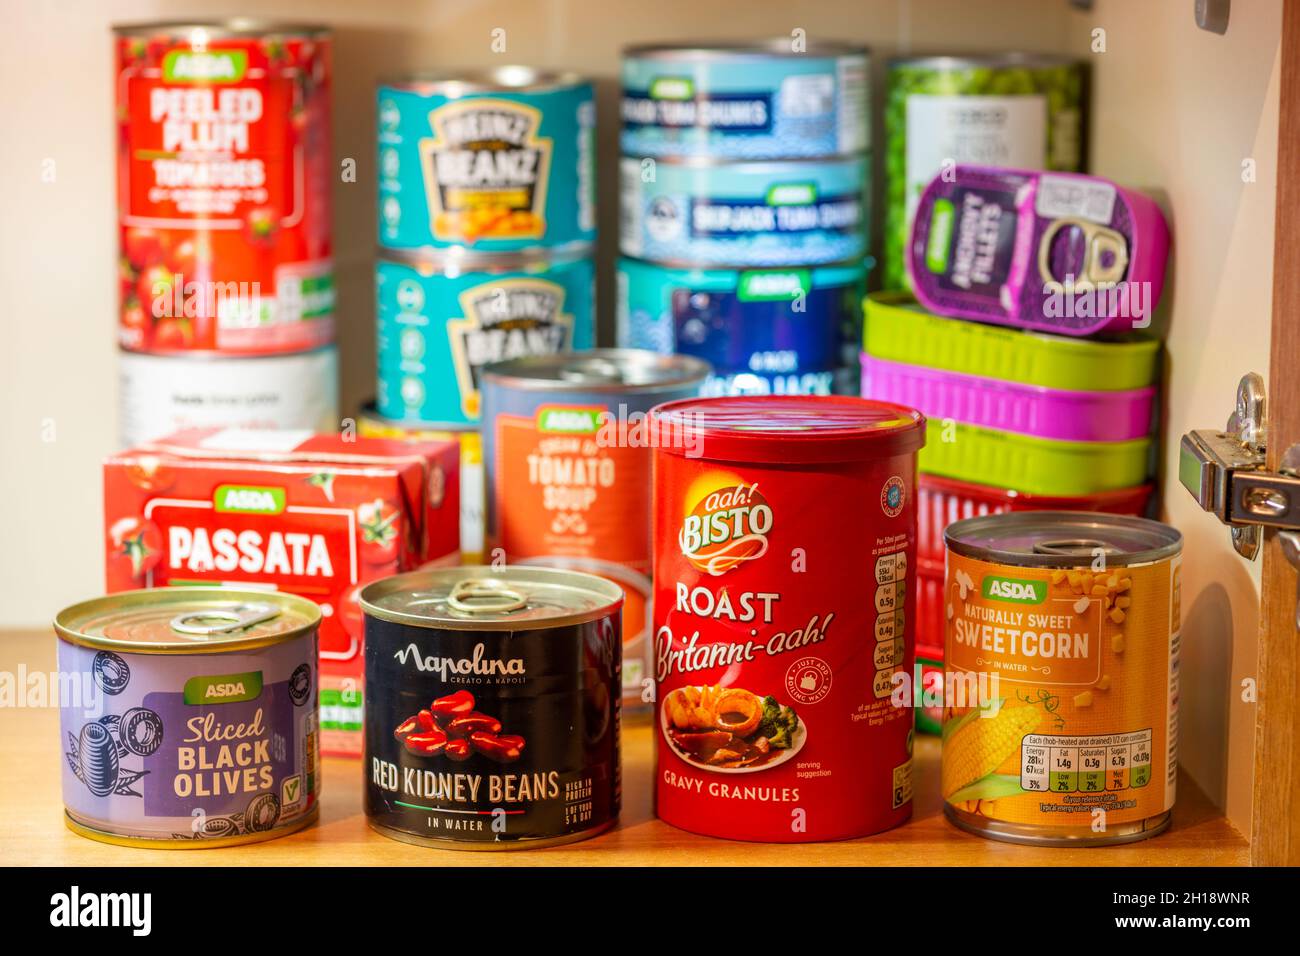 https://c8.alamy.com/comp/2H18WNR/tinned-or-canned-foodstuffs-in-a-uk-kitchen-cupboard-stocked-up-storage-provisions-2H18WNR.jpg